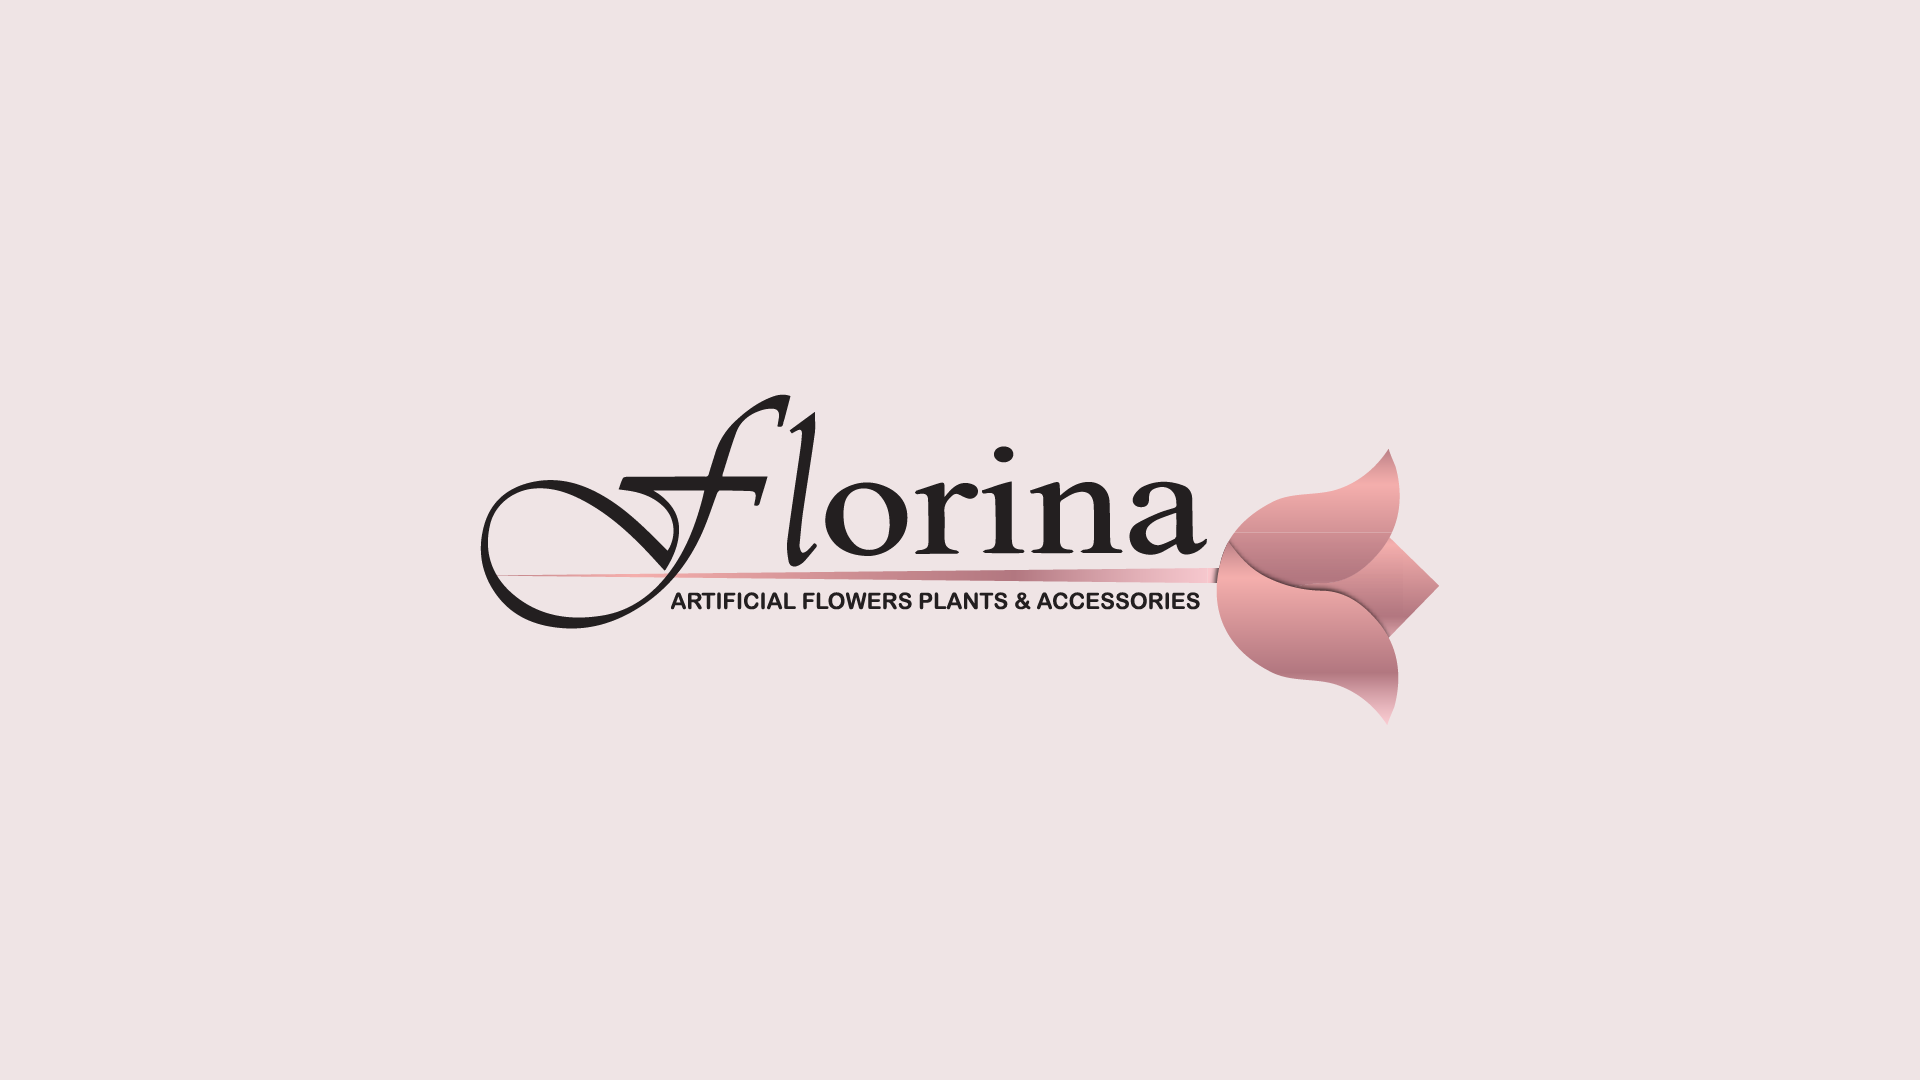 Florina, The Yard's Tangible Library of Fancy Artificial Decorations!